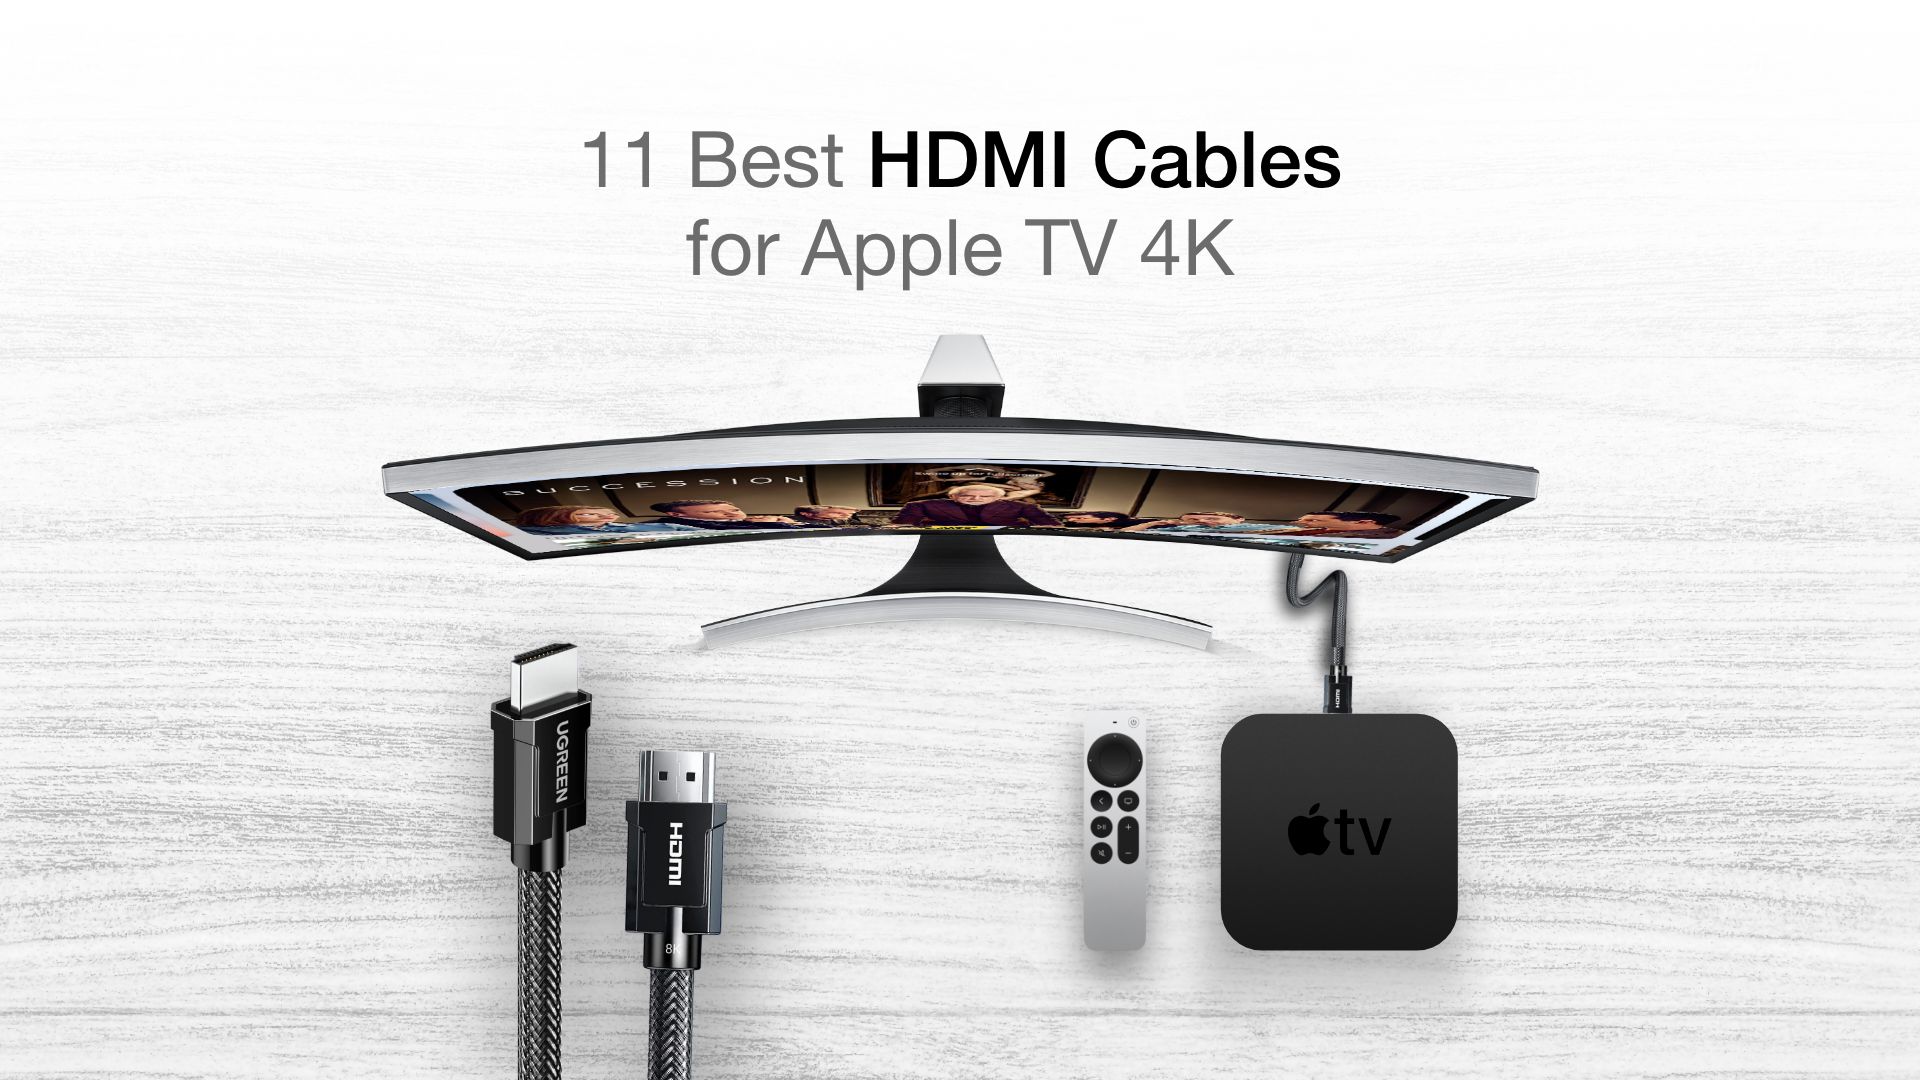 11 Best HDMI Cables for Apple TV 4K in 2022